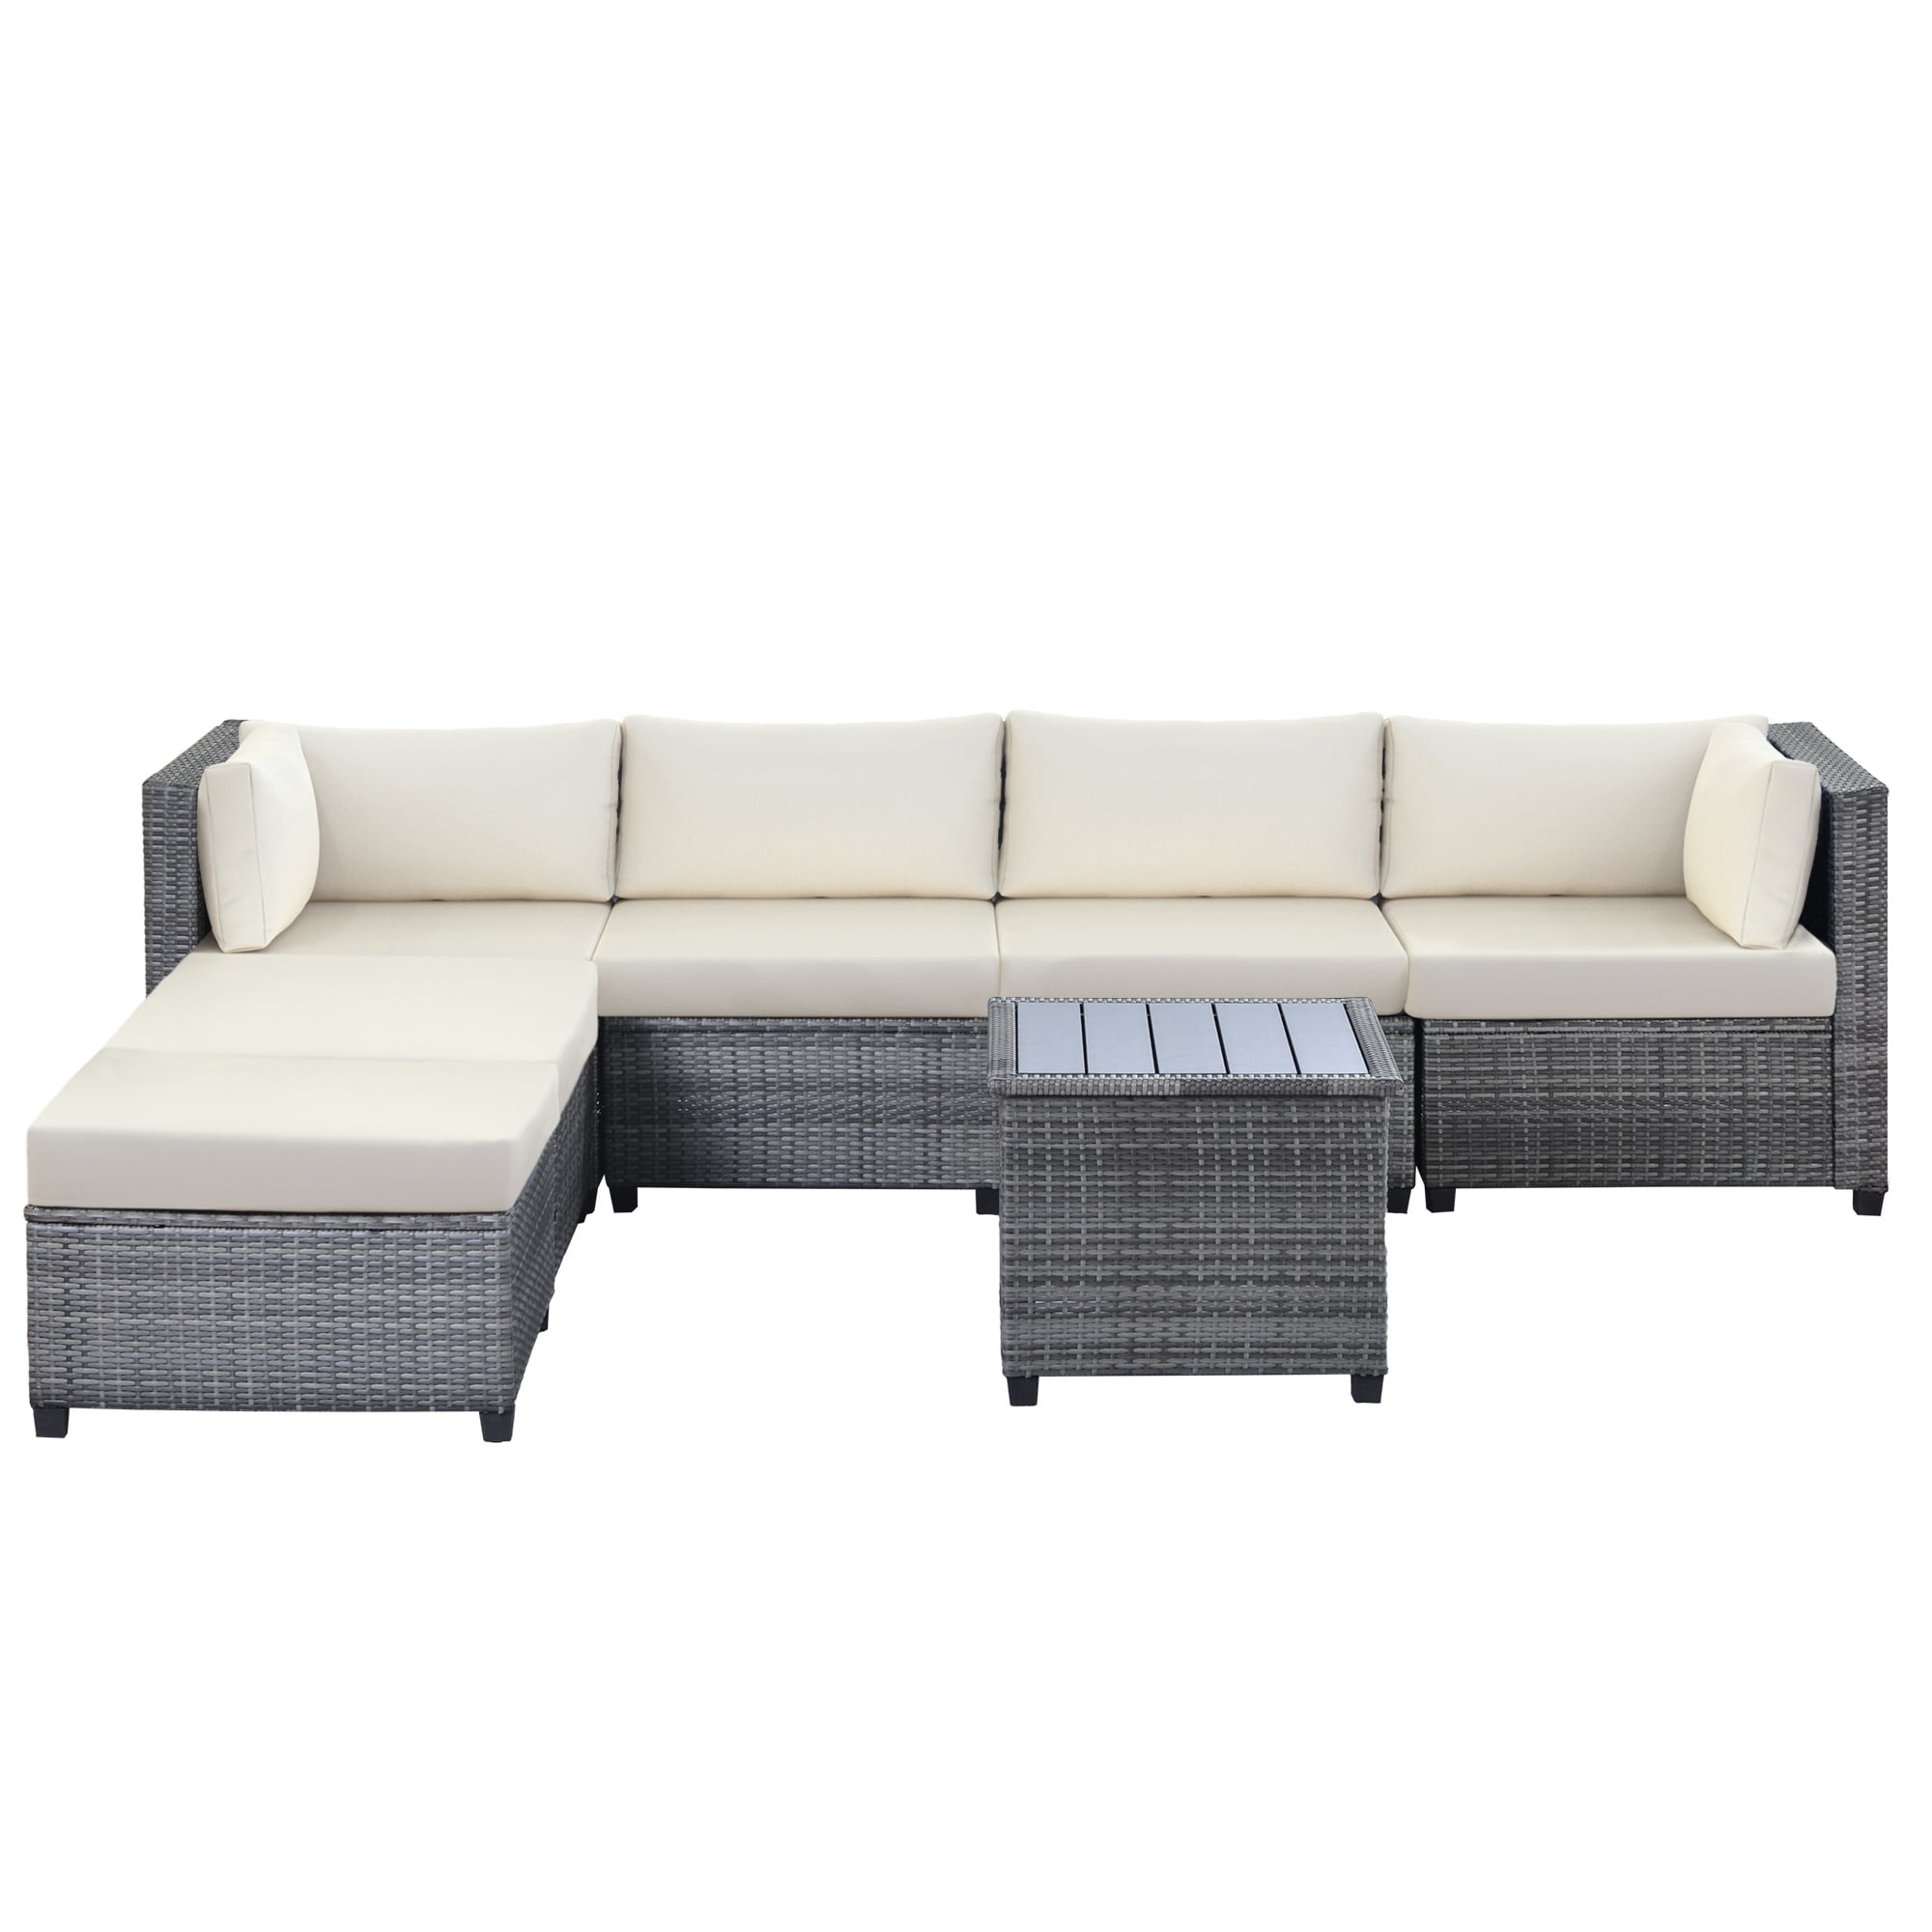 7 Piece Rattan Sectional Seating Group